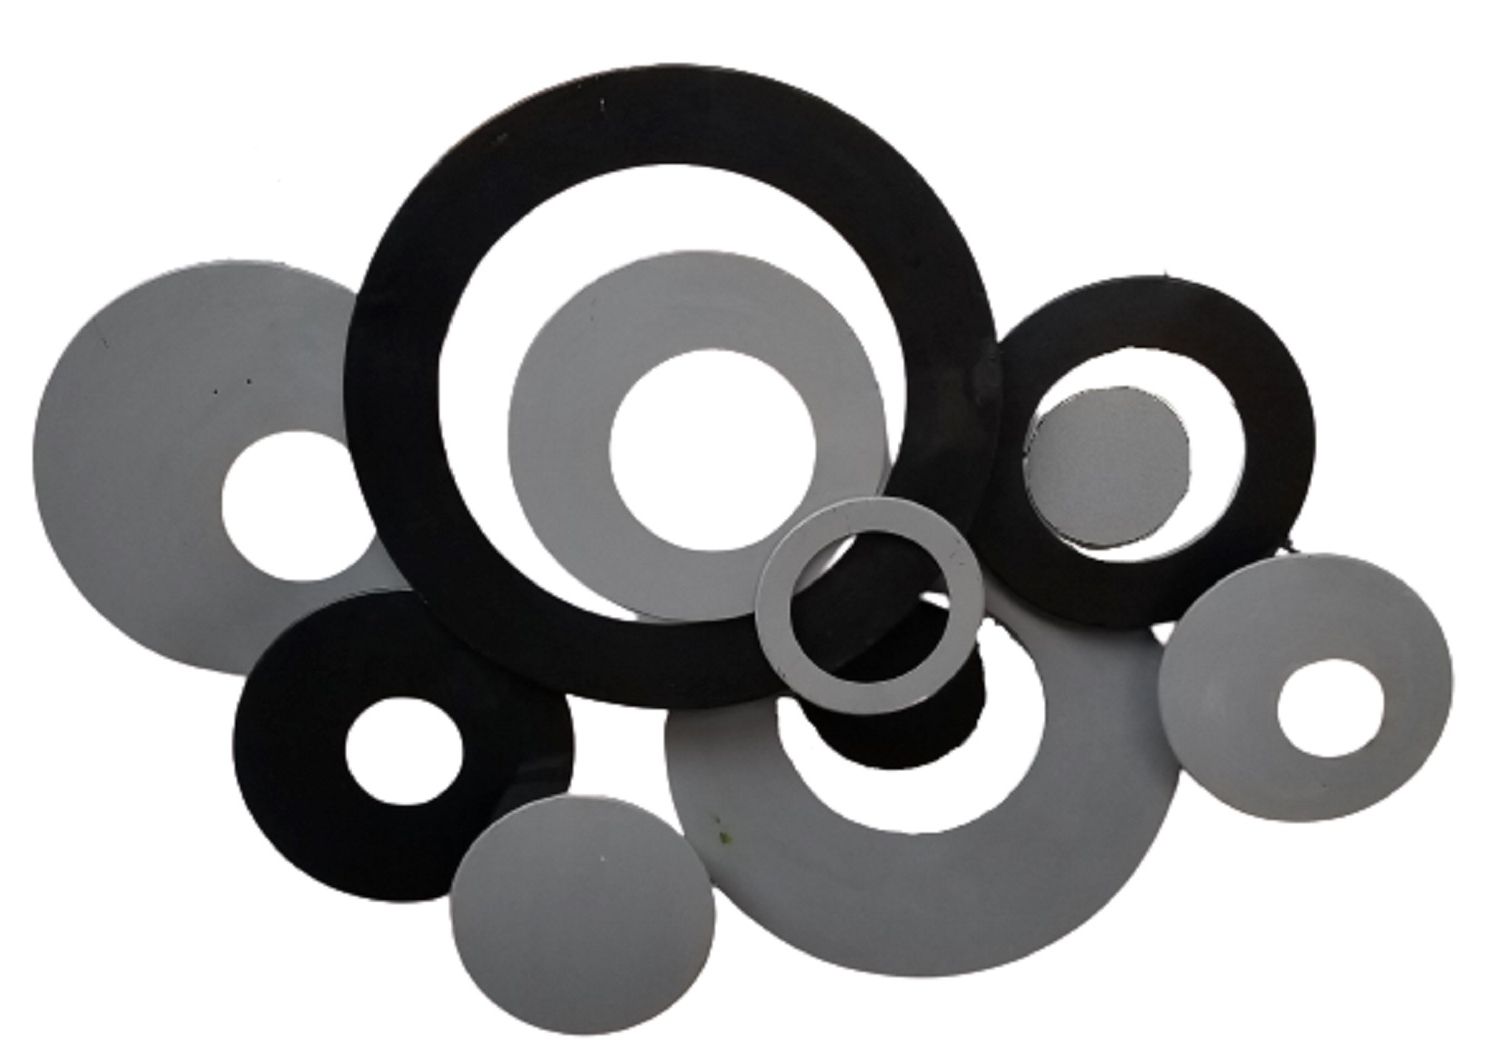 Metal Wall Art – Charcoal Linked Circle Disc Abstract Intended For 2018 Gray Metal Wall Art (View 10 of 15)